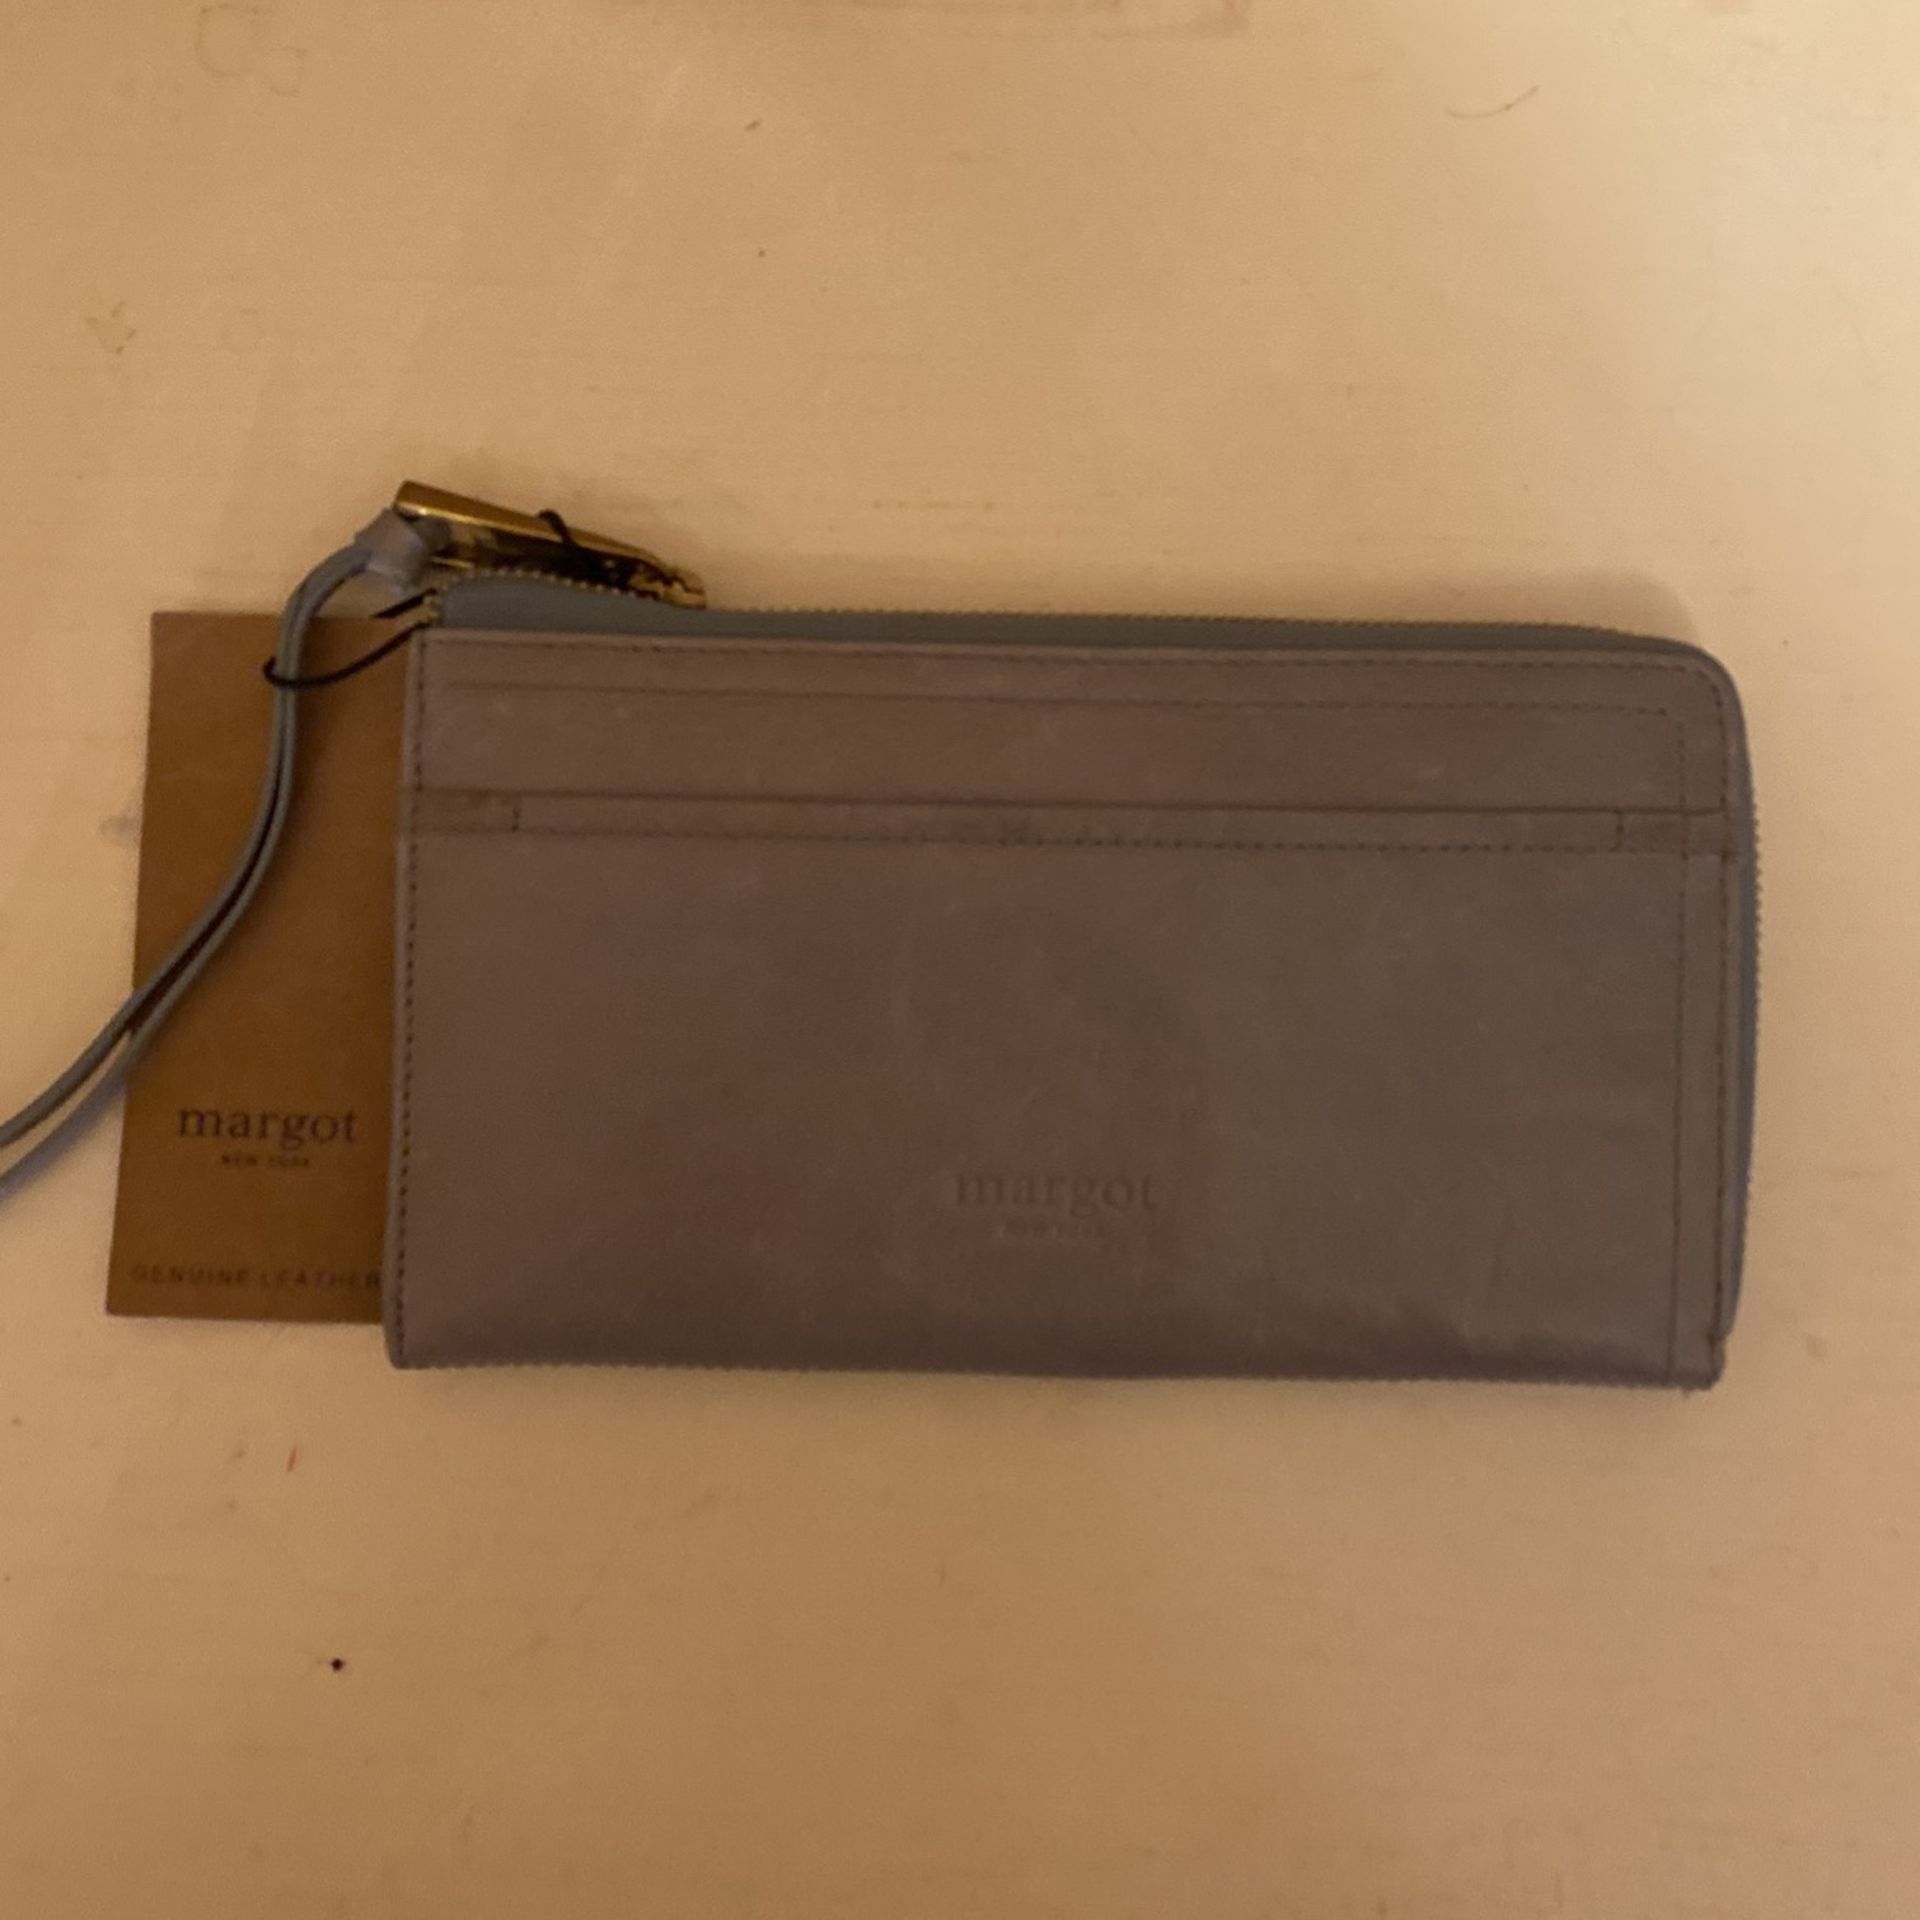 Margot New York All Leather Patty  Envelope Zip Around Large Wristlet Wallet $8 C My Other Wallets Ty